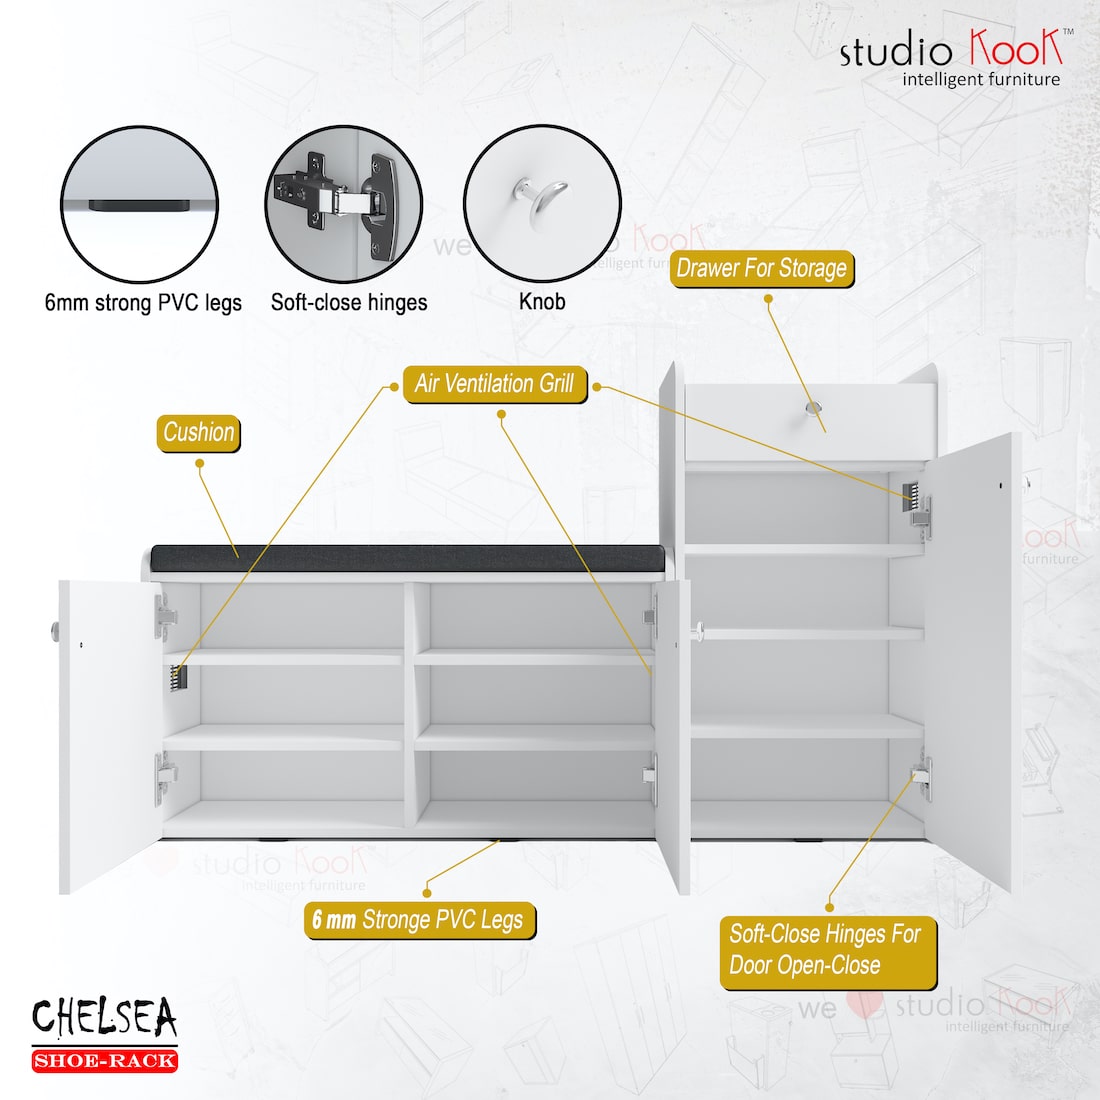 Chelsea Shoerack || Shoe Cabinet with Cushion Seating and 20 pairs capacity